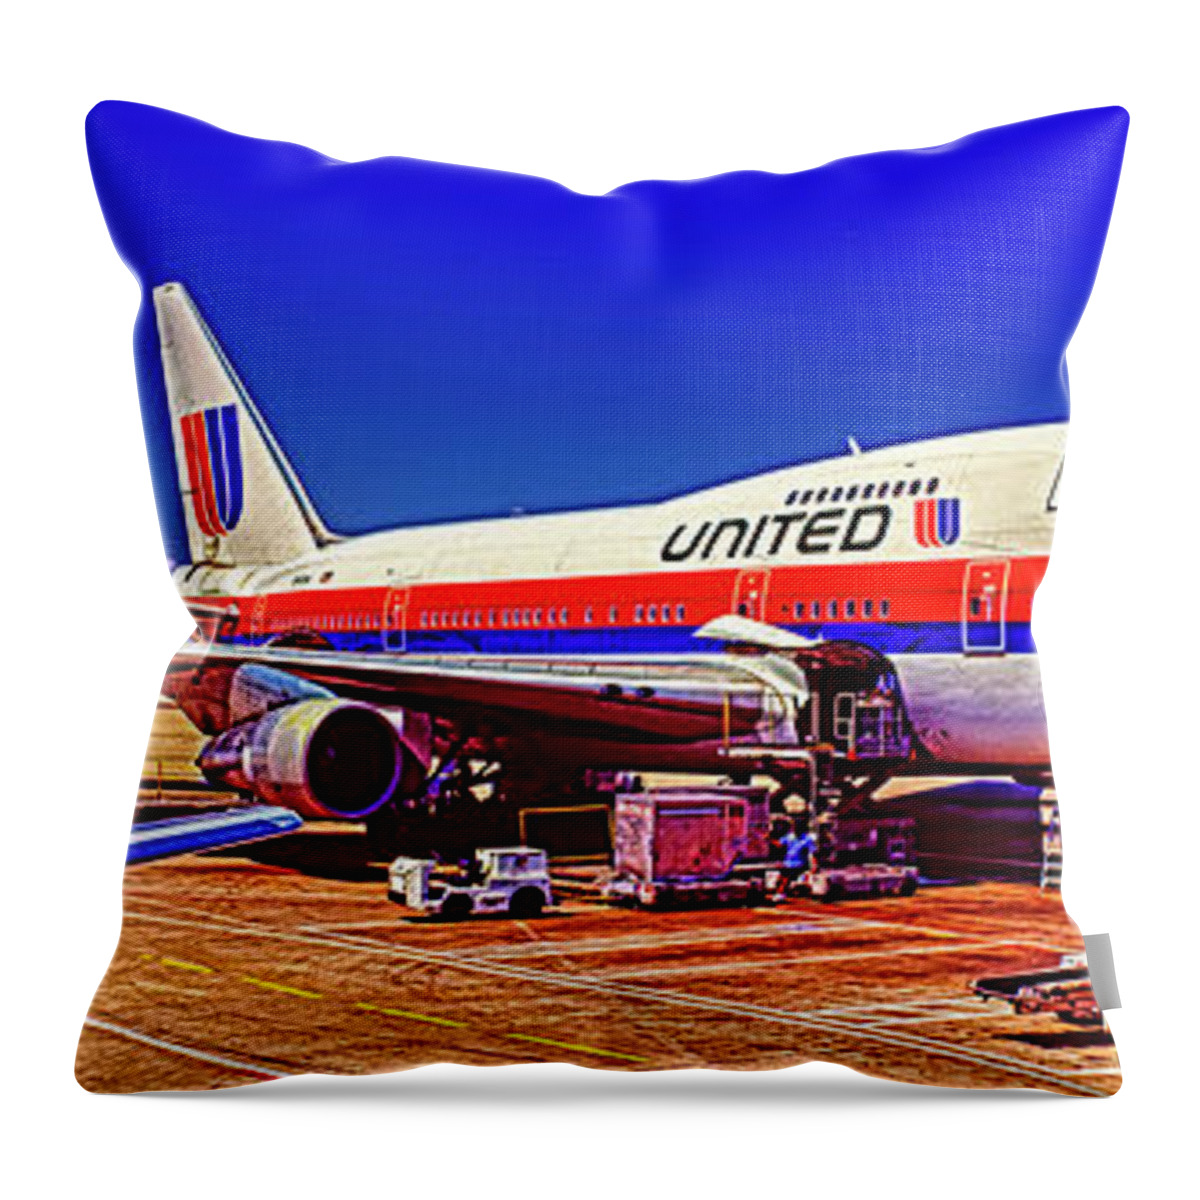 747 Throw Pillow featuring the photograph 747 Sp White Livery Tulip by Tom Jelen